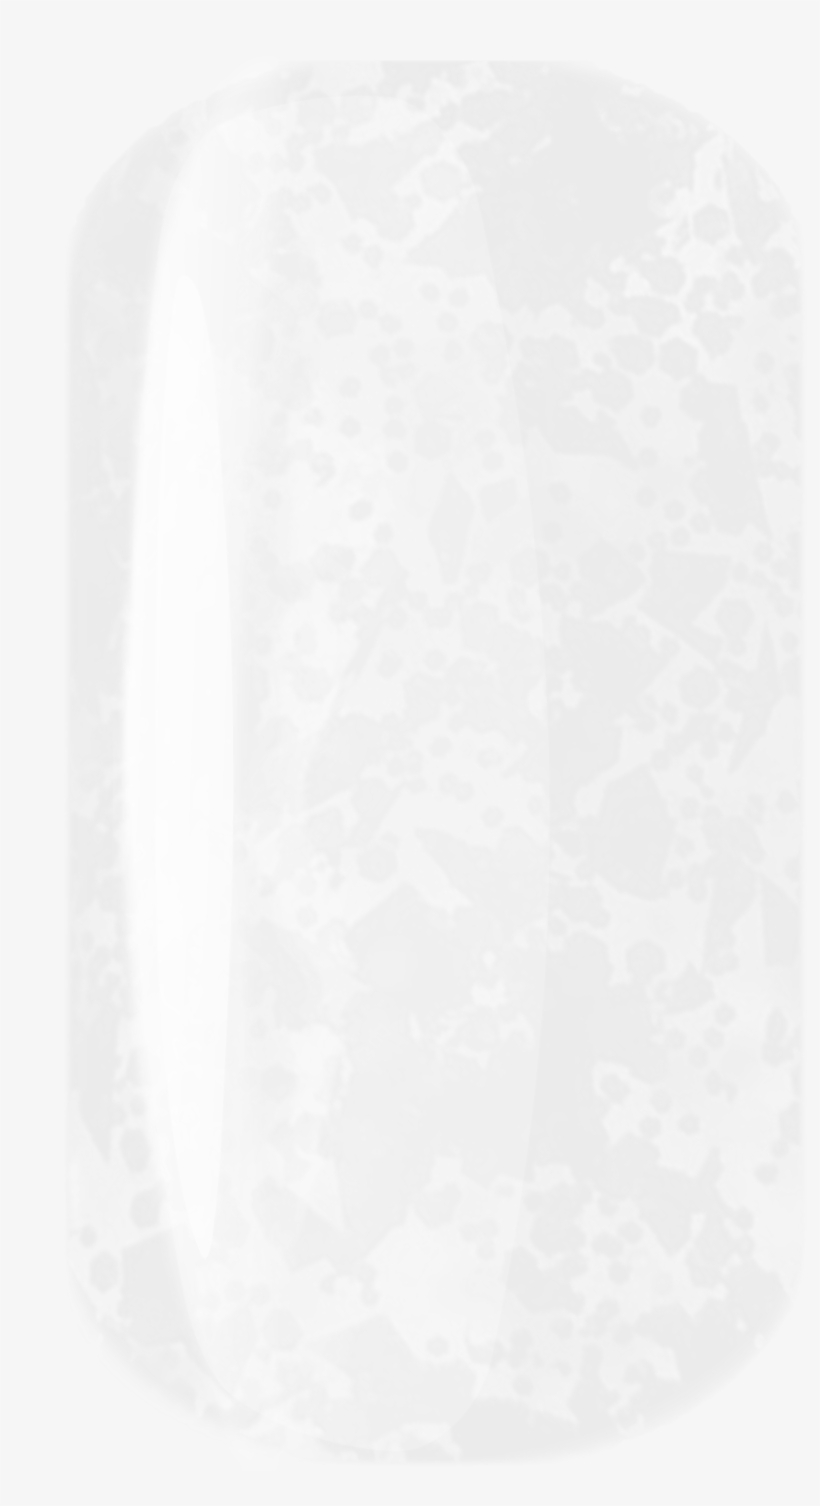 Gel Play White Lace - Design, transparent png #1330386